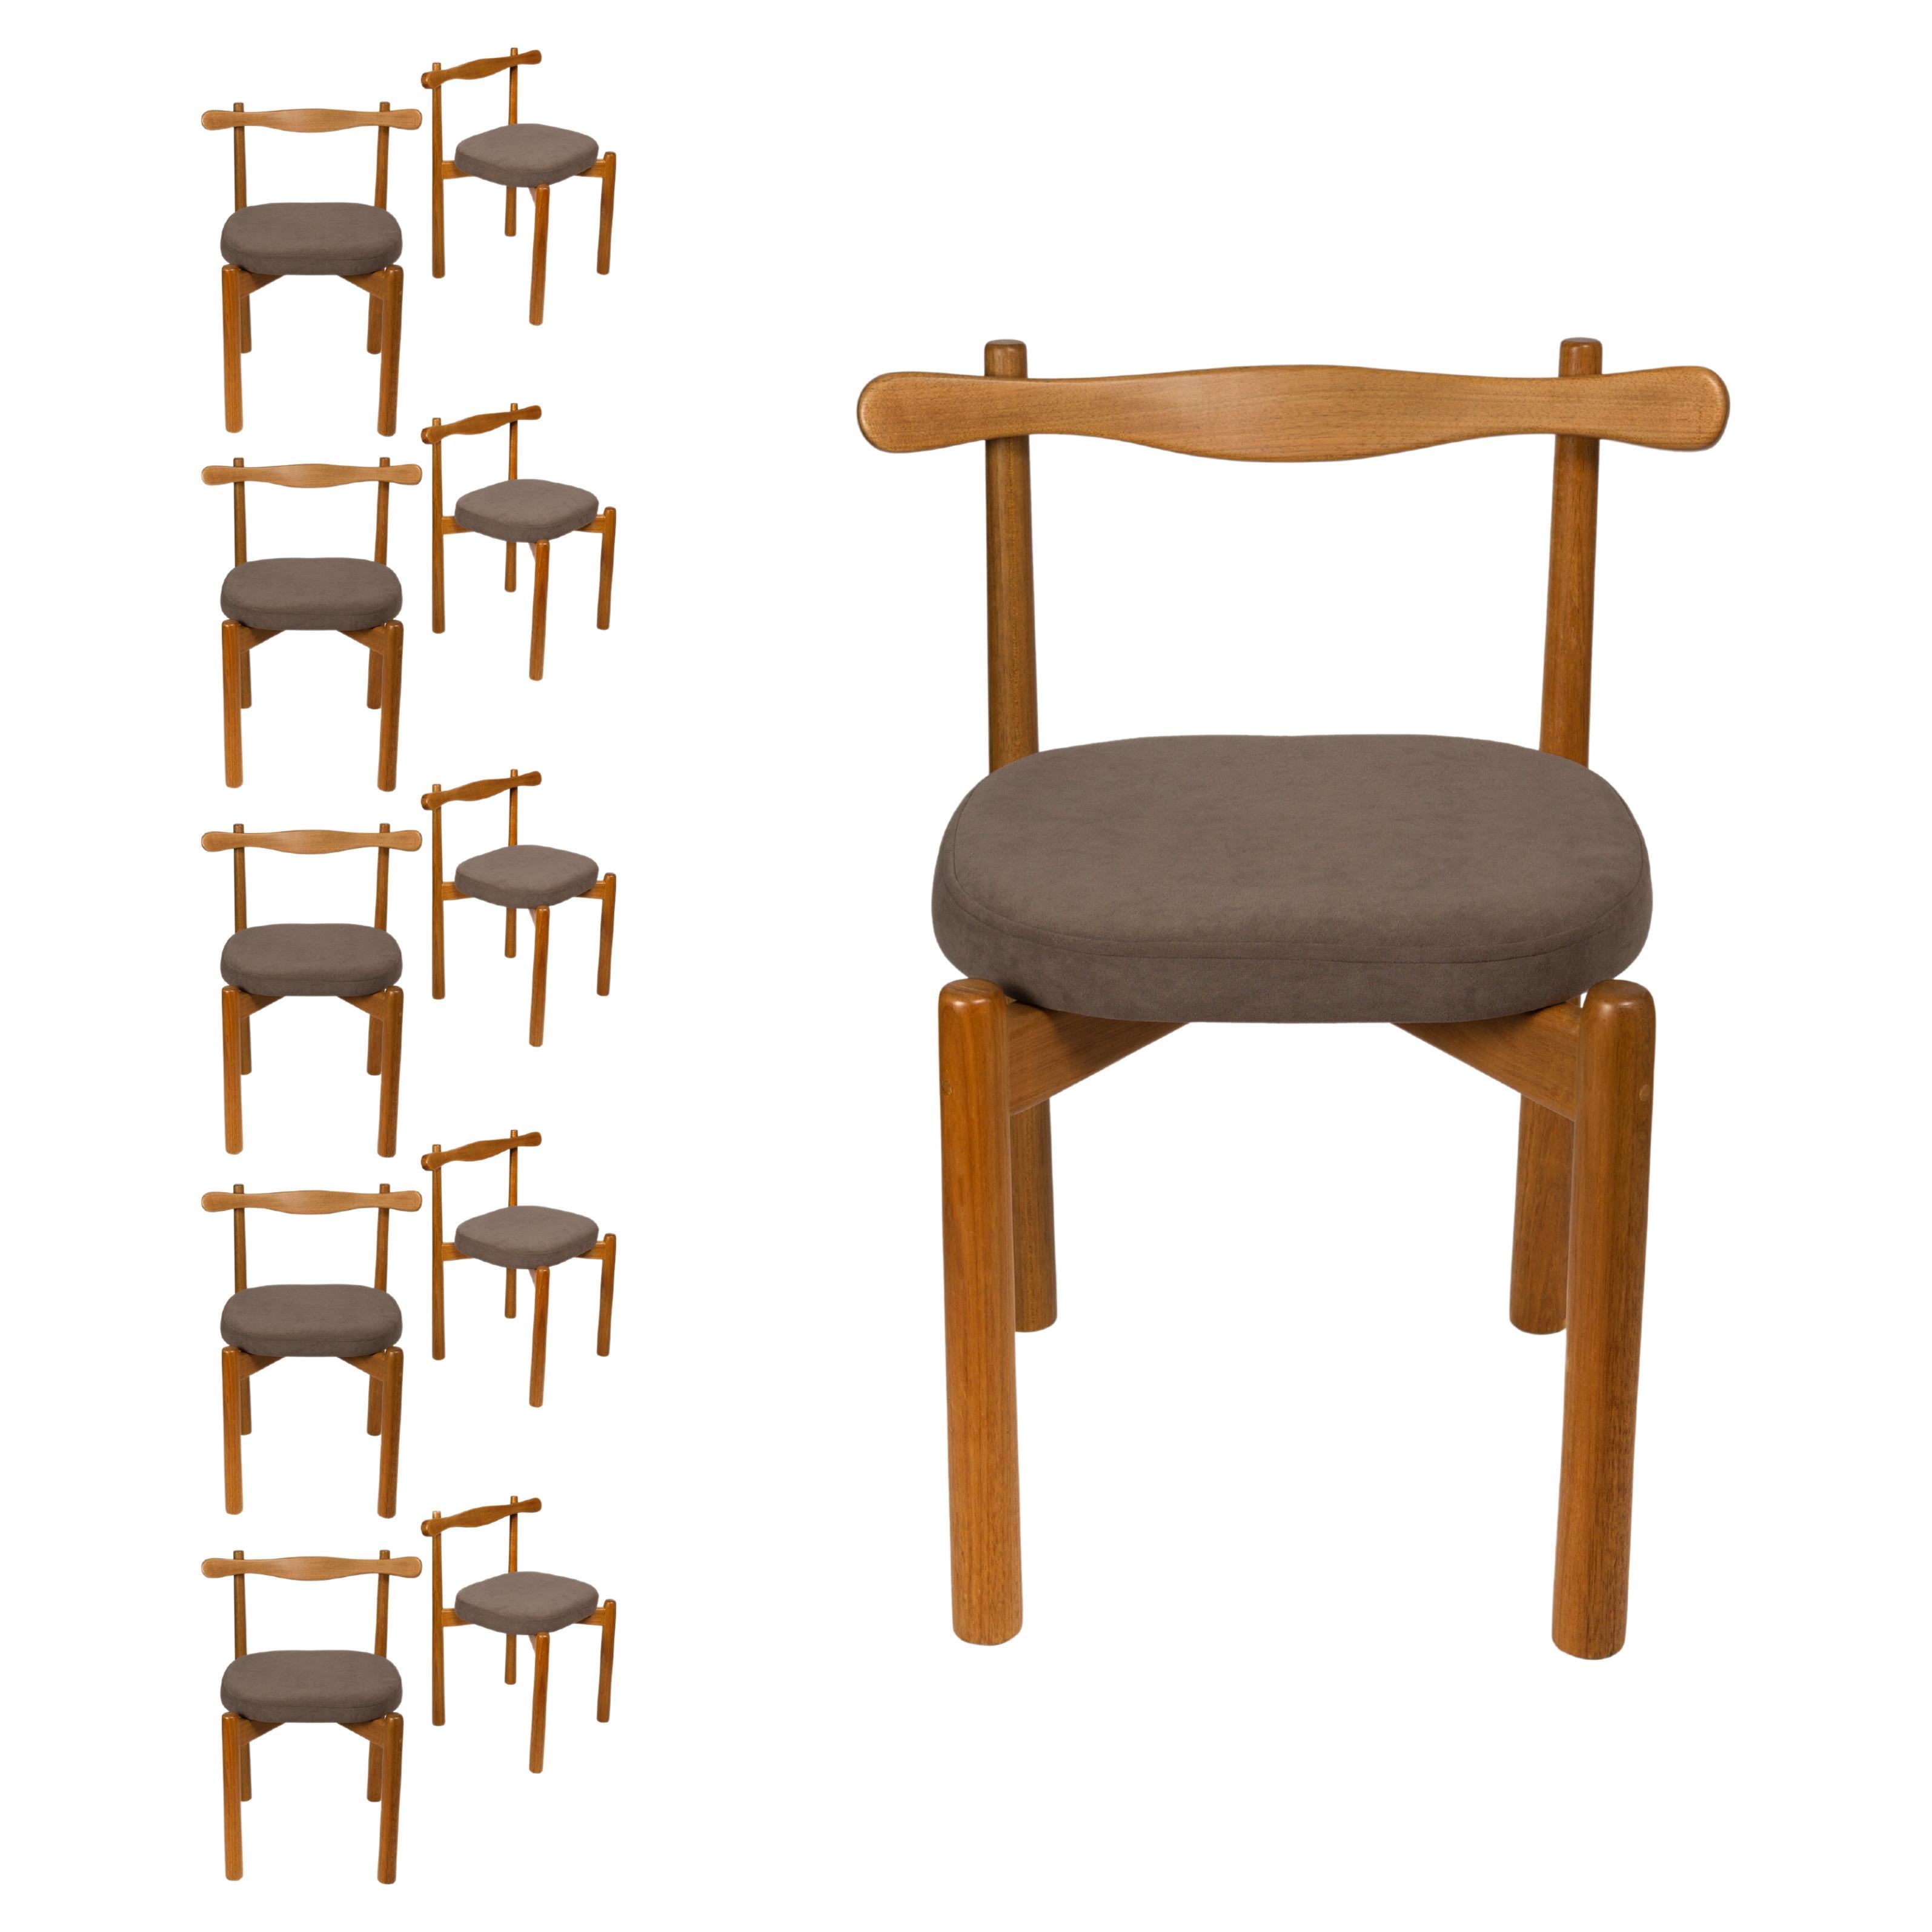 Set of 10 Dining Chairs Uçá Light Brown Wood (fabric ref : 20) For Sale